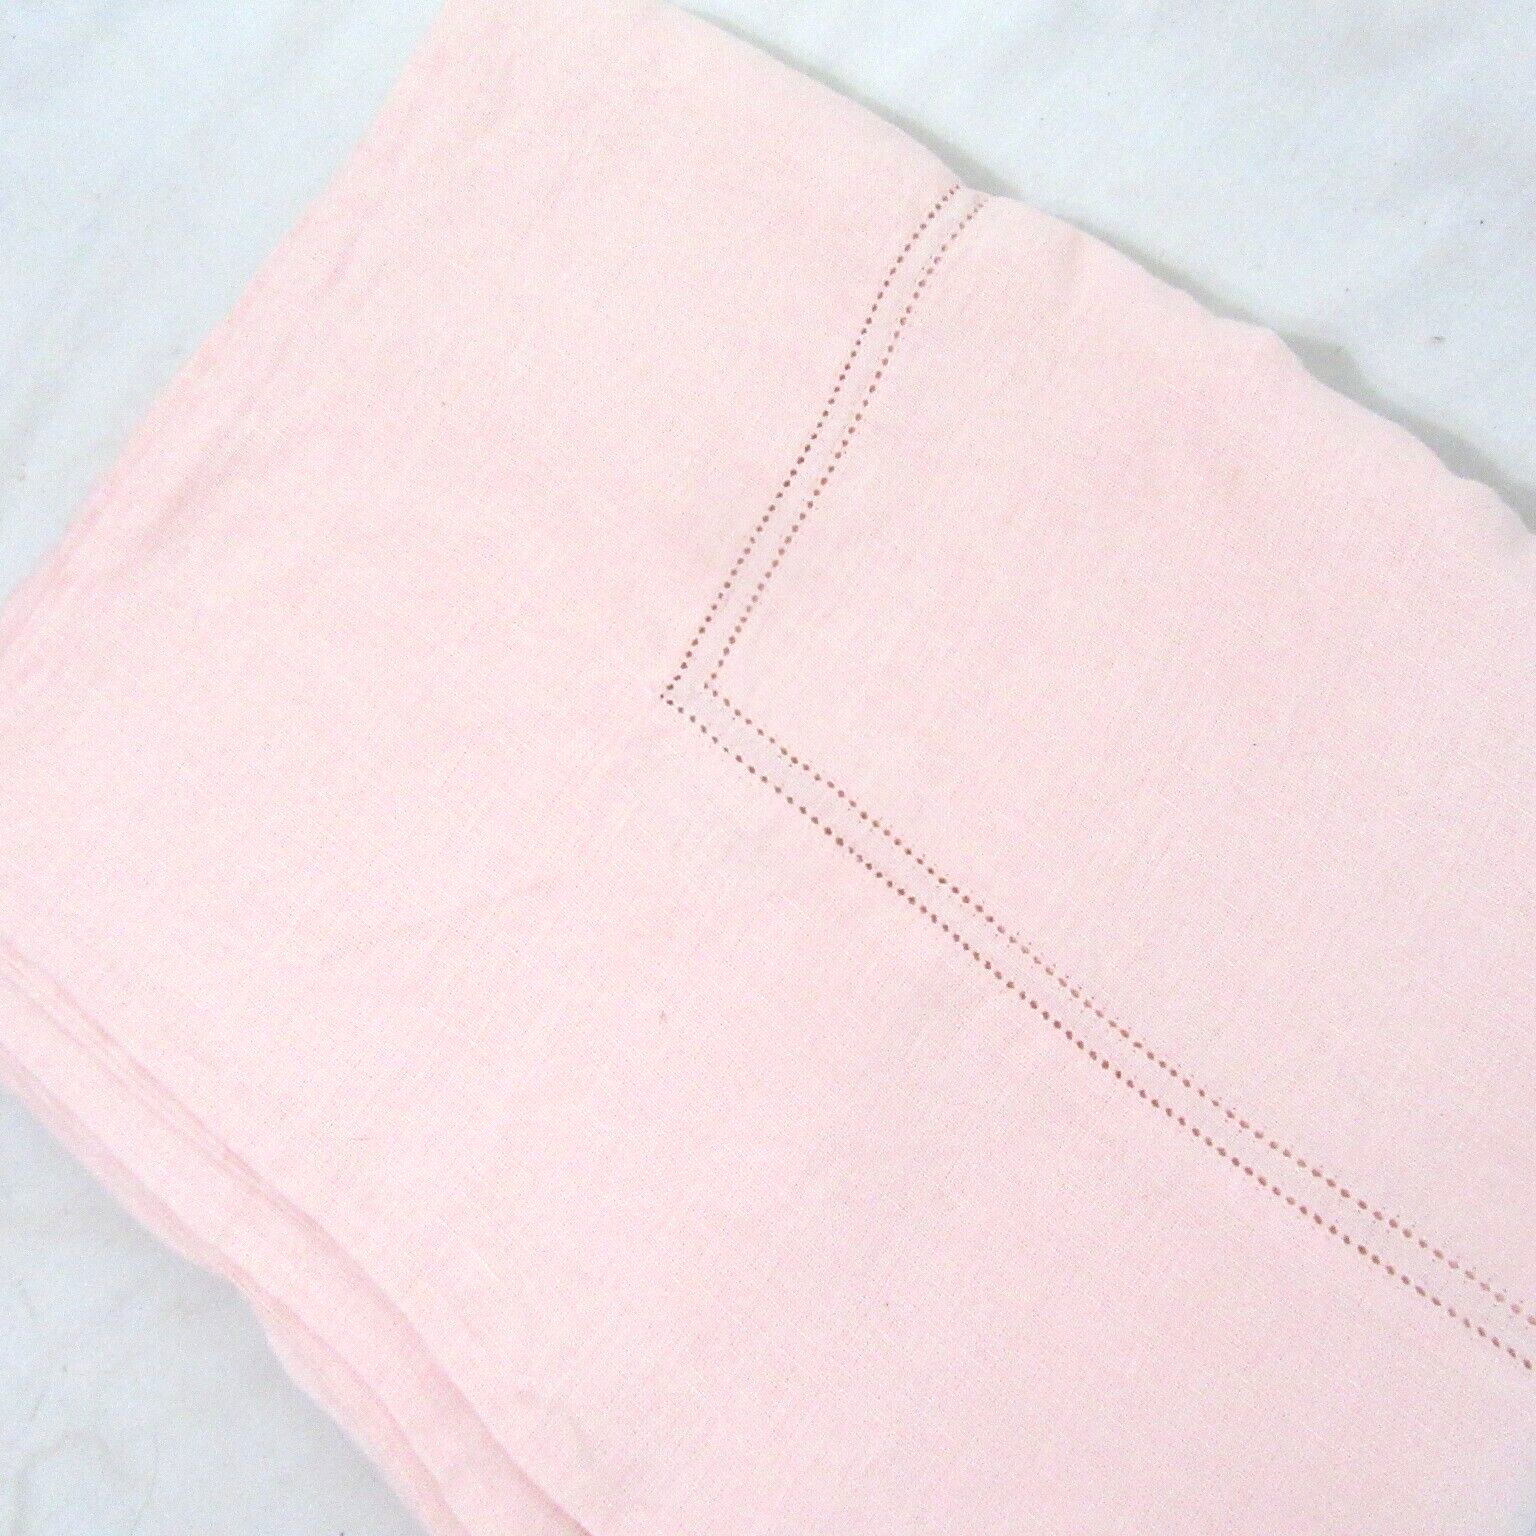 Williams-Sonoma Hemstitched Linen Solid Pale Pink 68 x 106 Oblong Tablecloth - $89.00